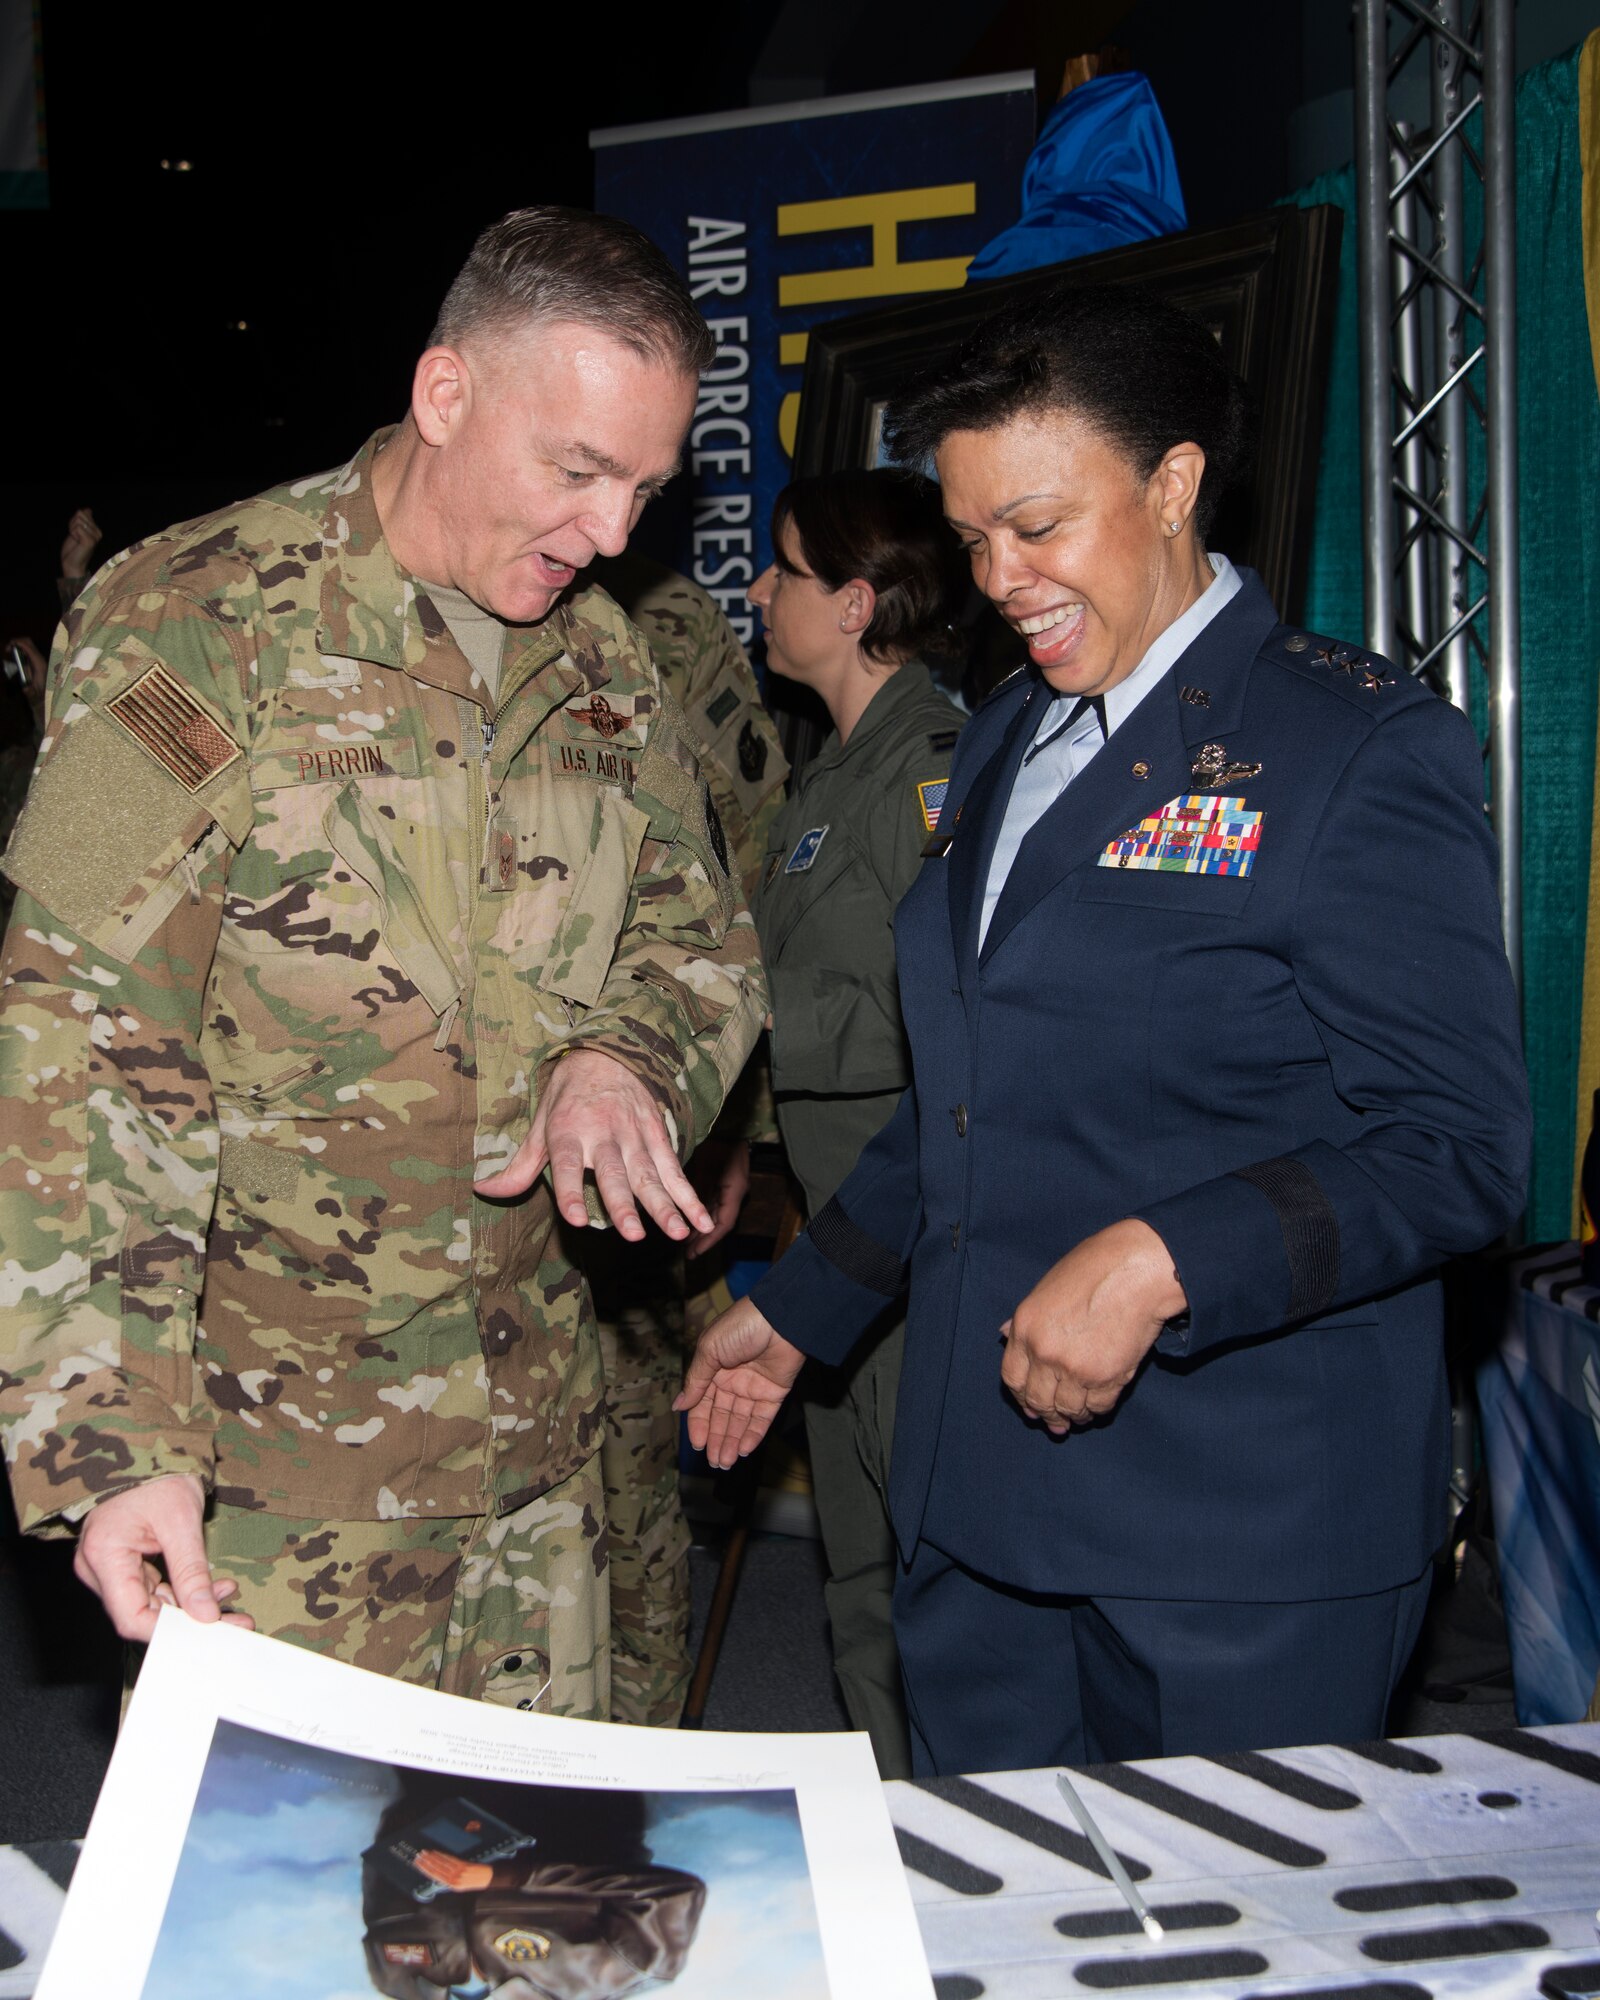 Image of Senior Master Sgt. Darby Perrin, heritage and combat artist and  Lt. Gen. Stayce Harris (retired) look at prints of the recently unveiled a painting a portrait of Harris during the 2020 Women in Aviation Conference, March 6 in Orlando, Florida. The portrait shows Harris standing in a flight jacket with flight crew checklists in hand with a KC-135R and C-141-B flying overhead, both aircraft were flown by Harris. (U.S. Air Force photo by Staff. Sgt. Cierra Presentado)